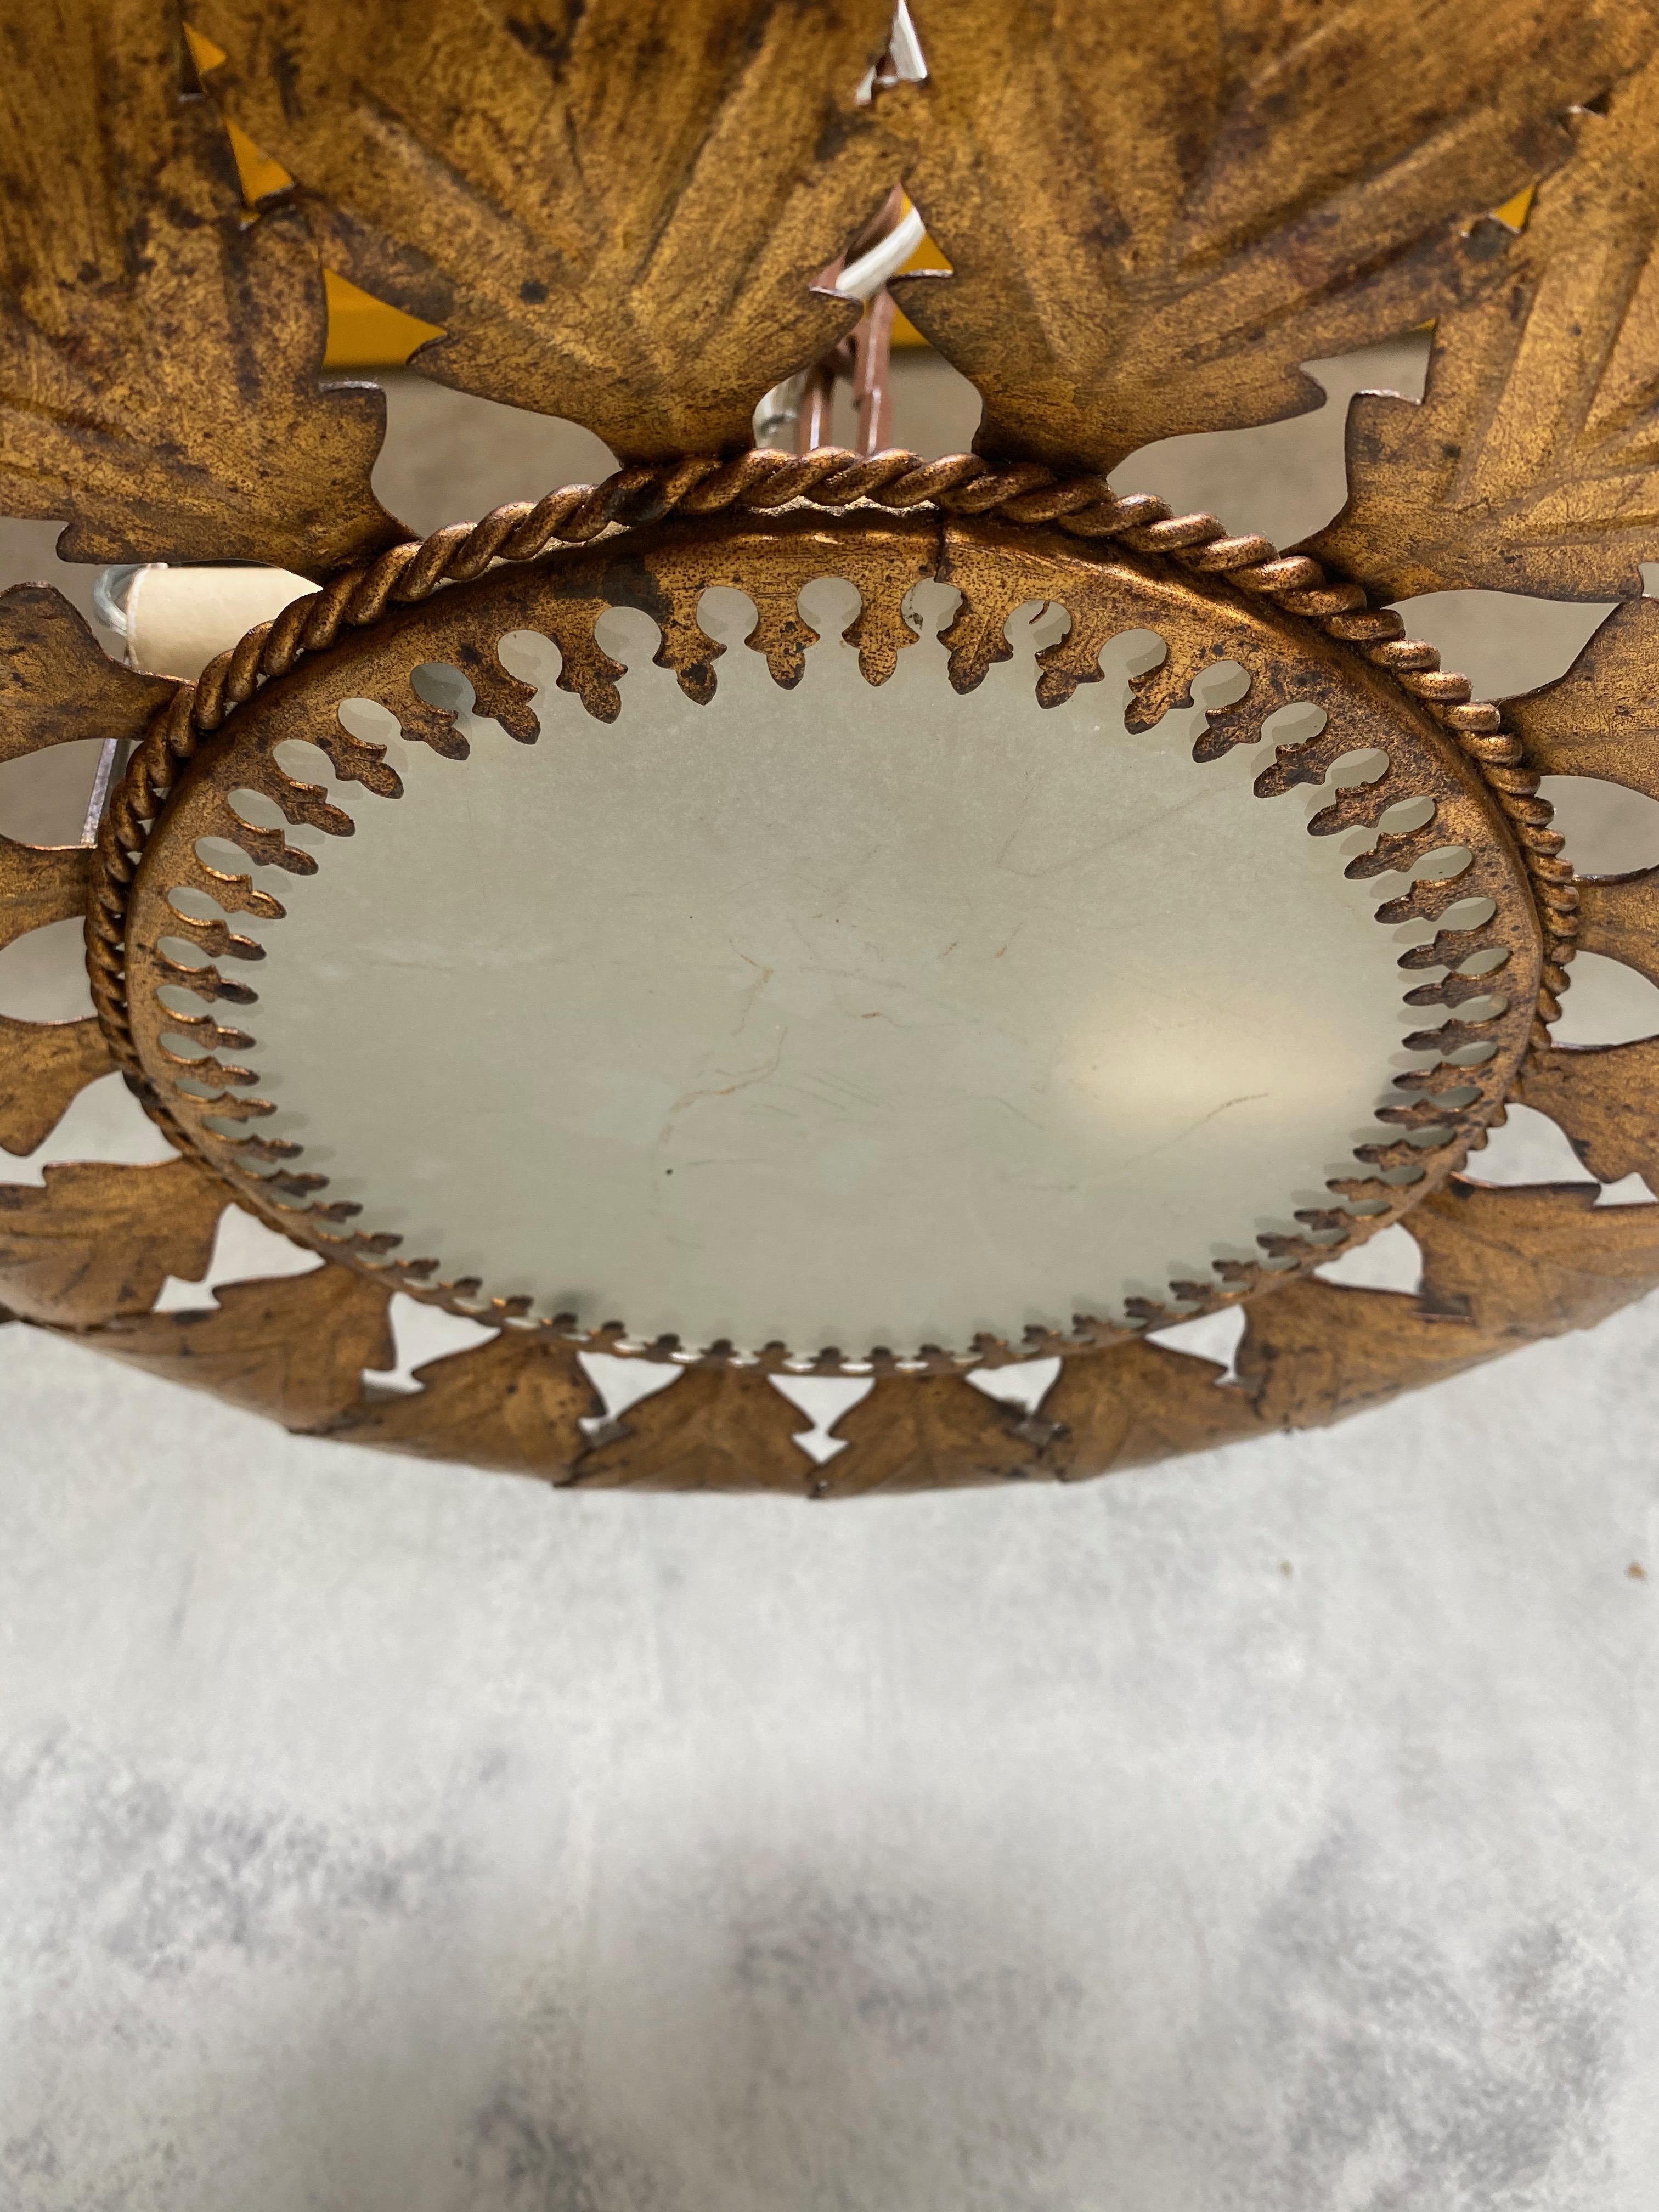 Gilt Metal Sunburst Ceiling Fixture with Feathered Rays For Sale 3